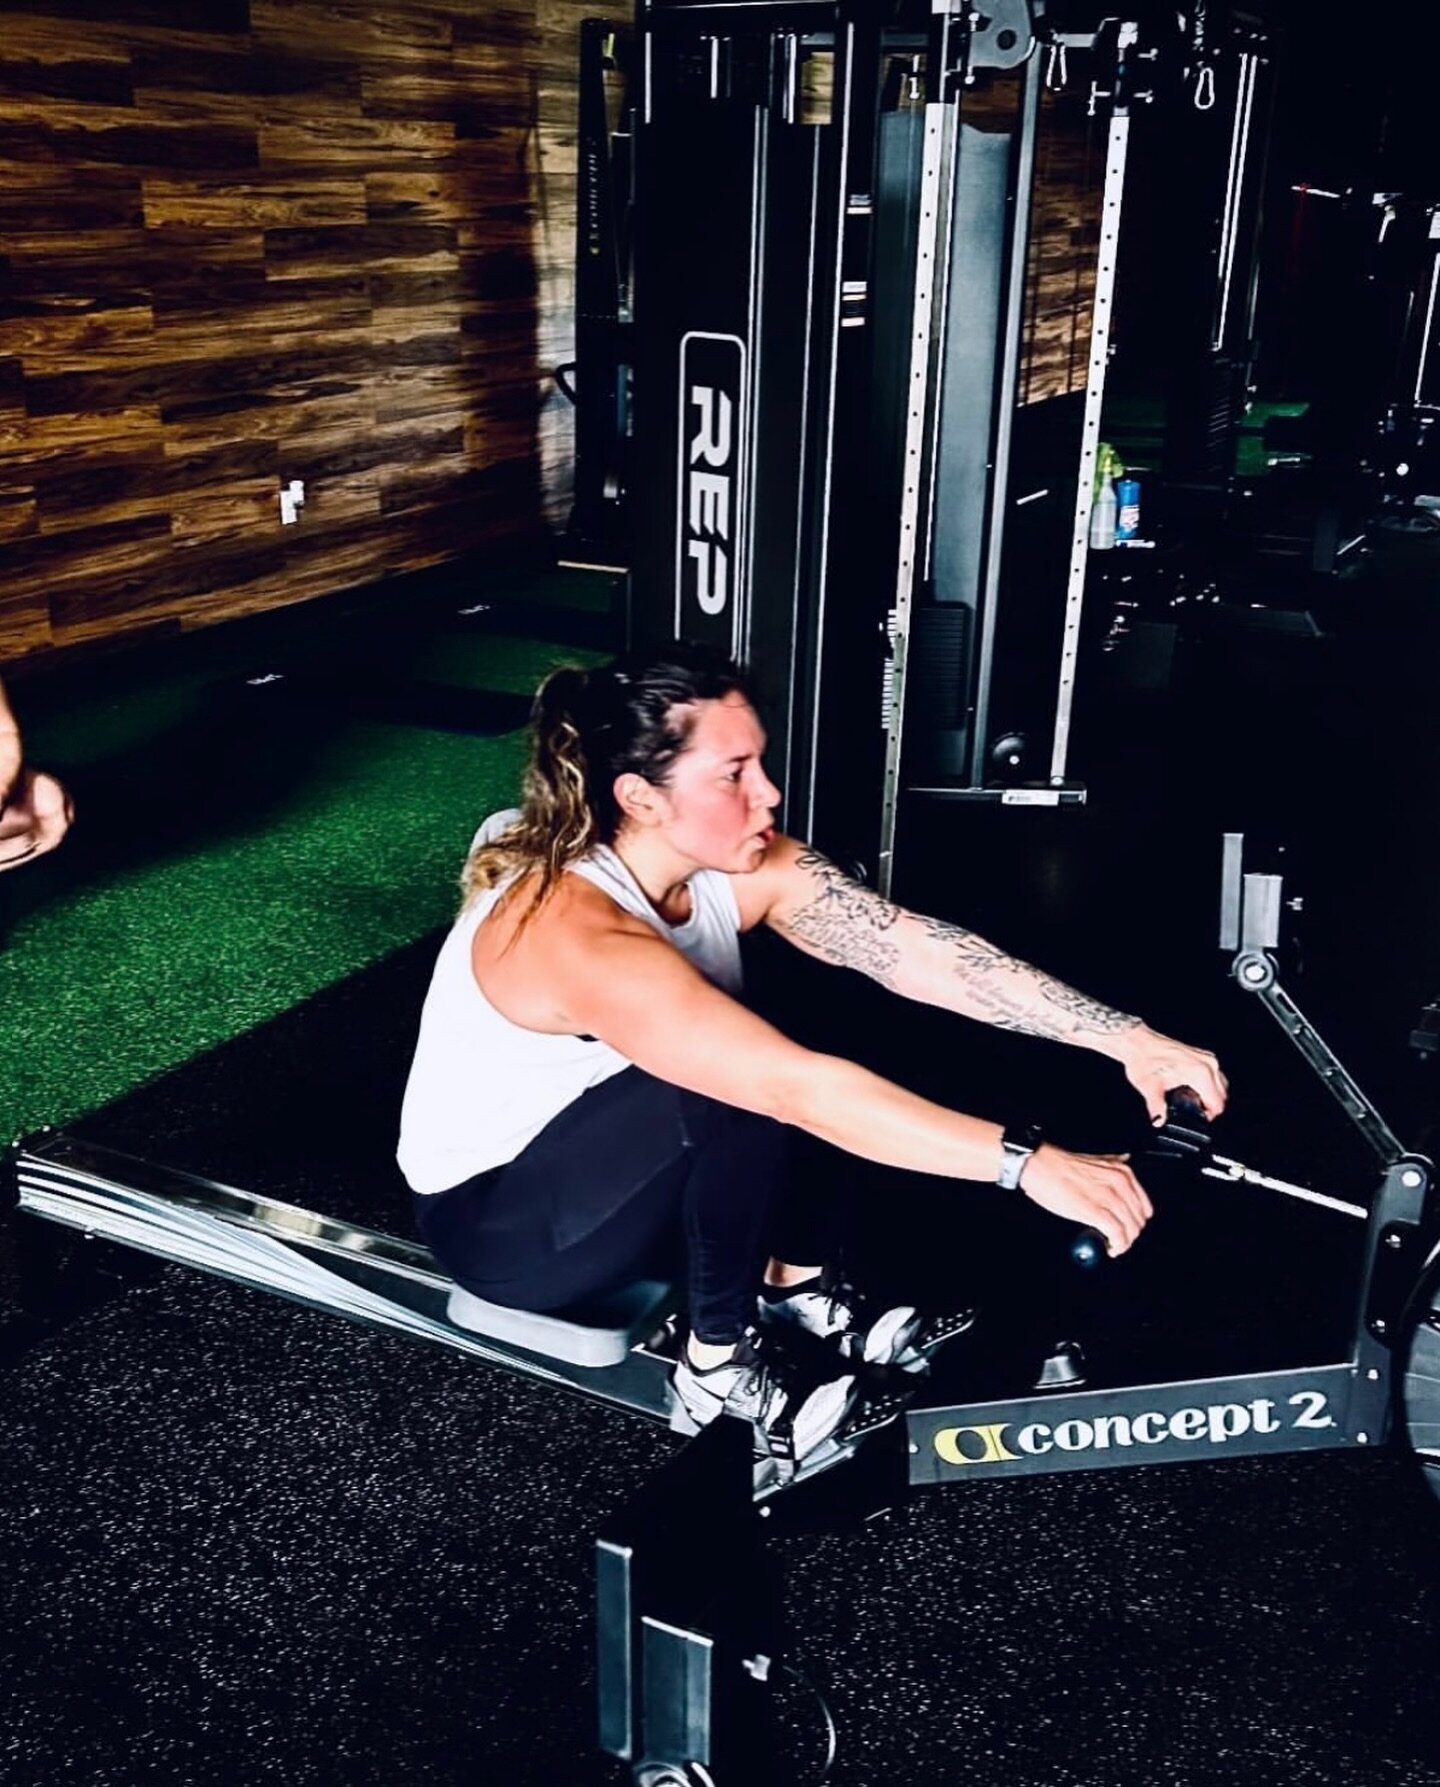 &ldquo;Push yourself because no one else is going to do it for you.&rdquo; 

#irvine #tustin #pushyourself #fitness #fitgoals #trainhard #grouptraining #concept2 #cardio #dailyreminder #exercise